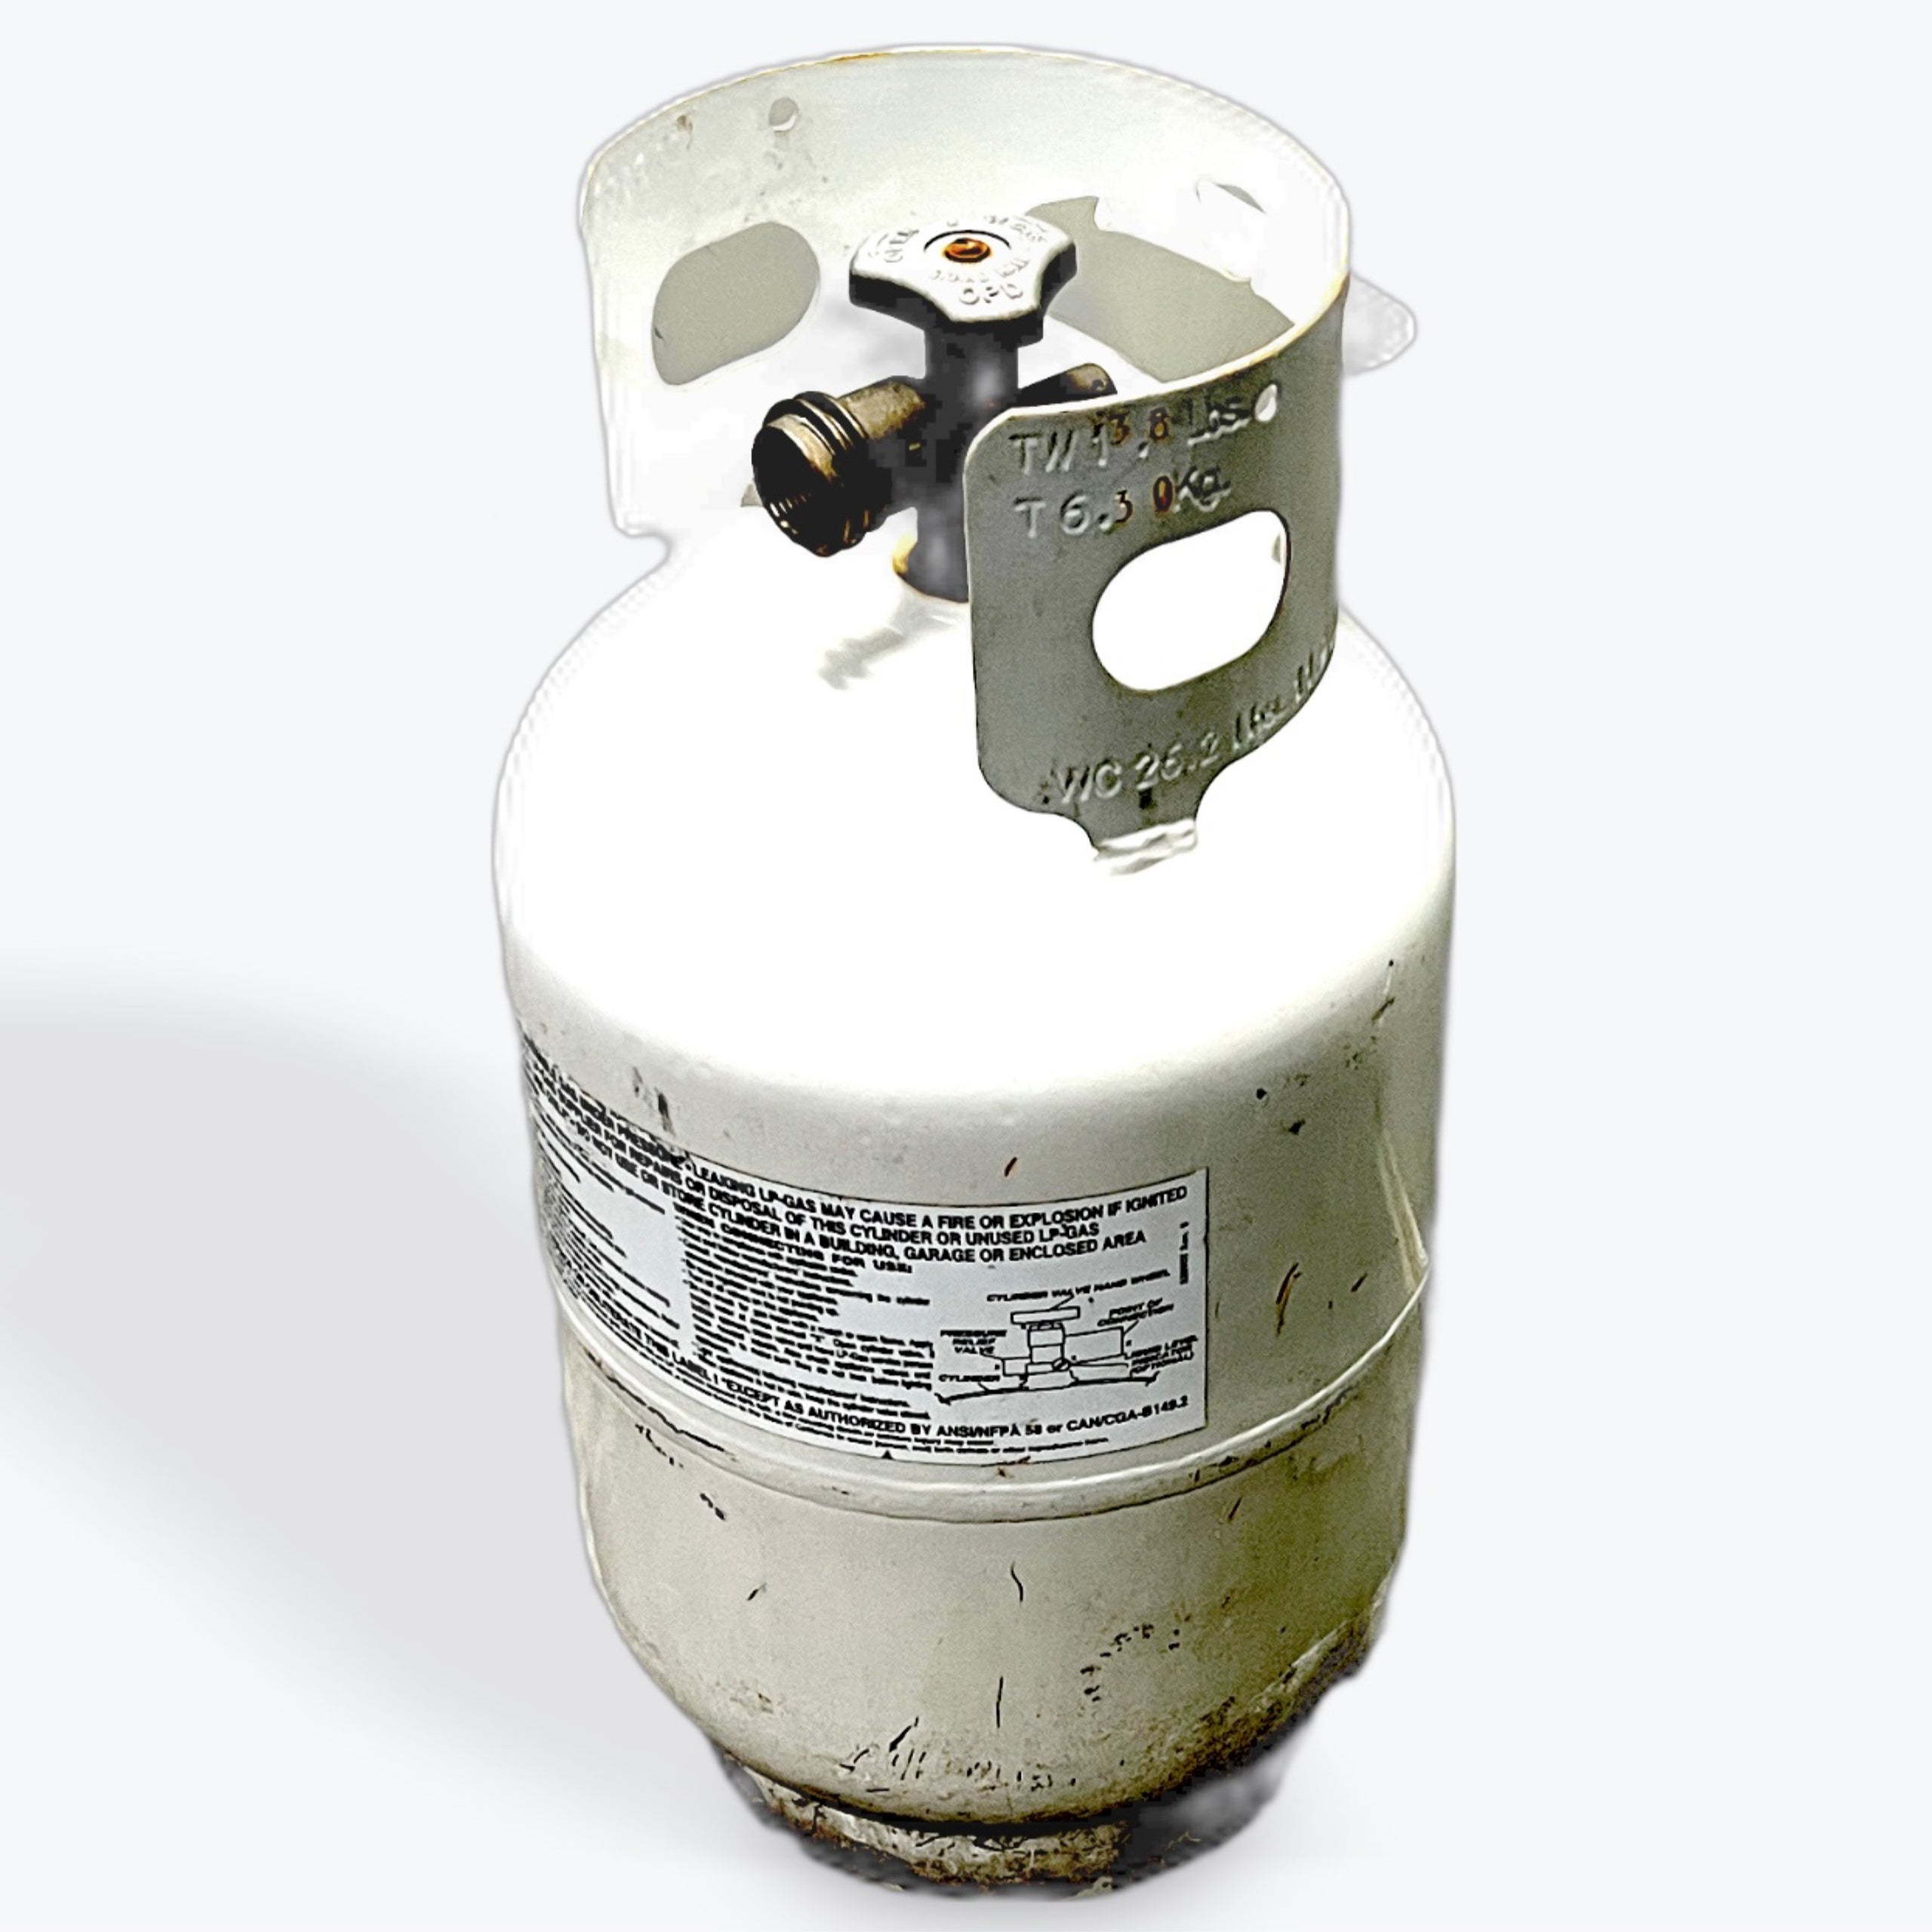 OPD Valve! What is it? - Propane Tank Store